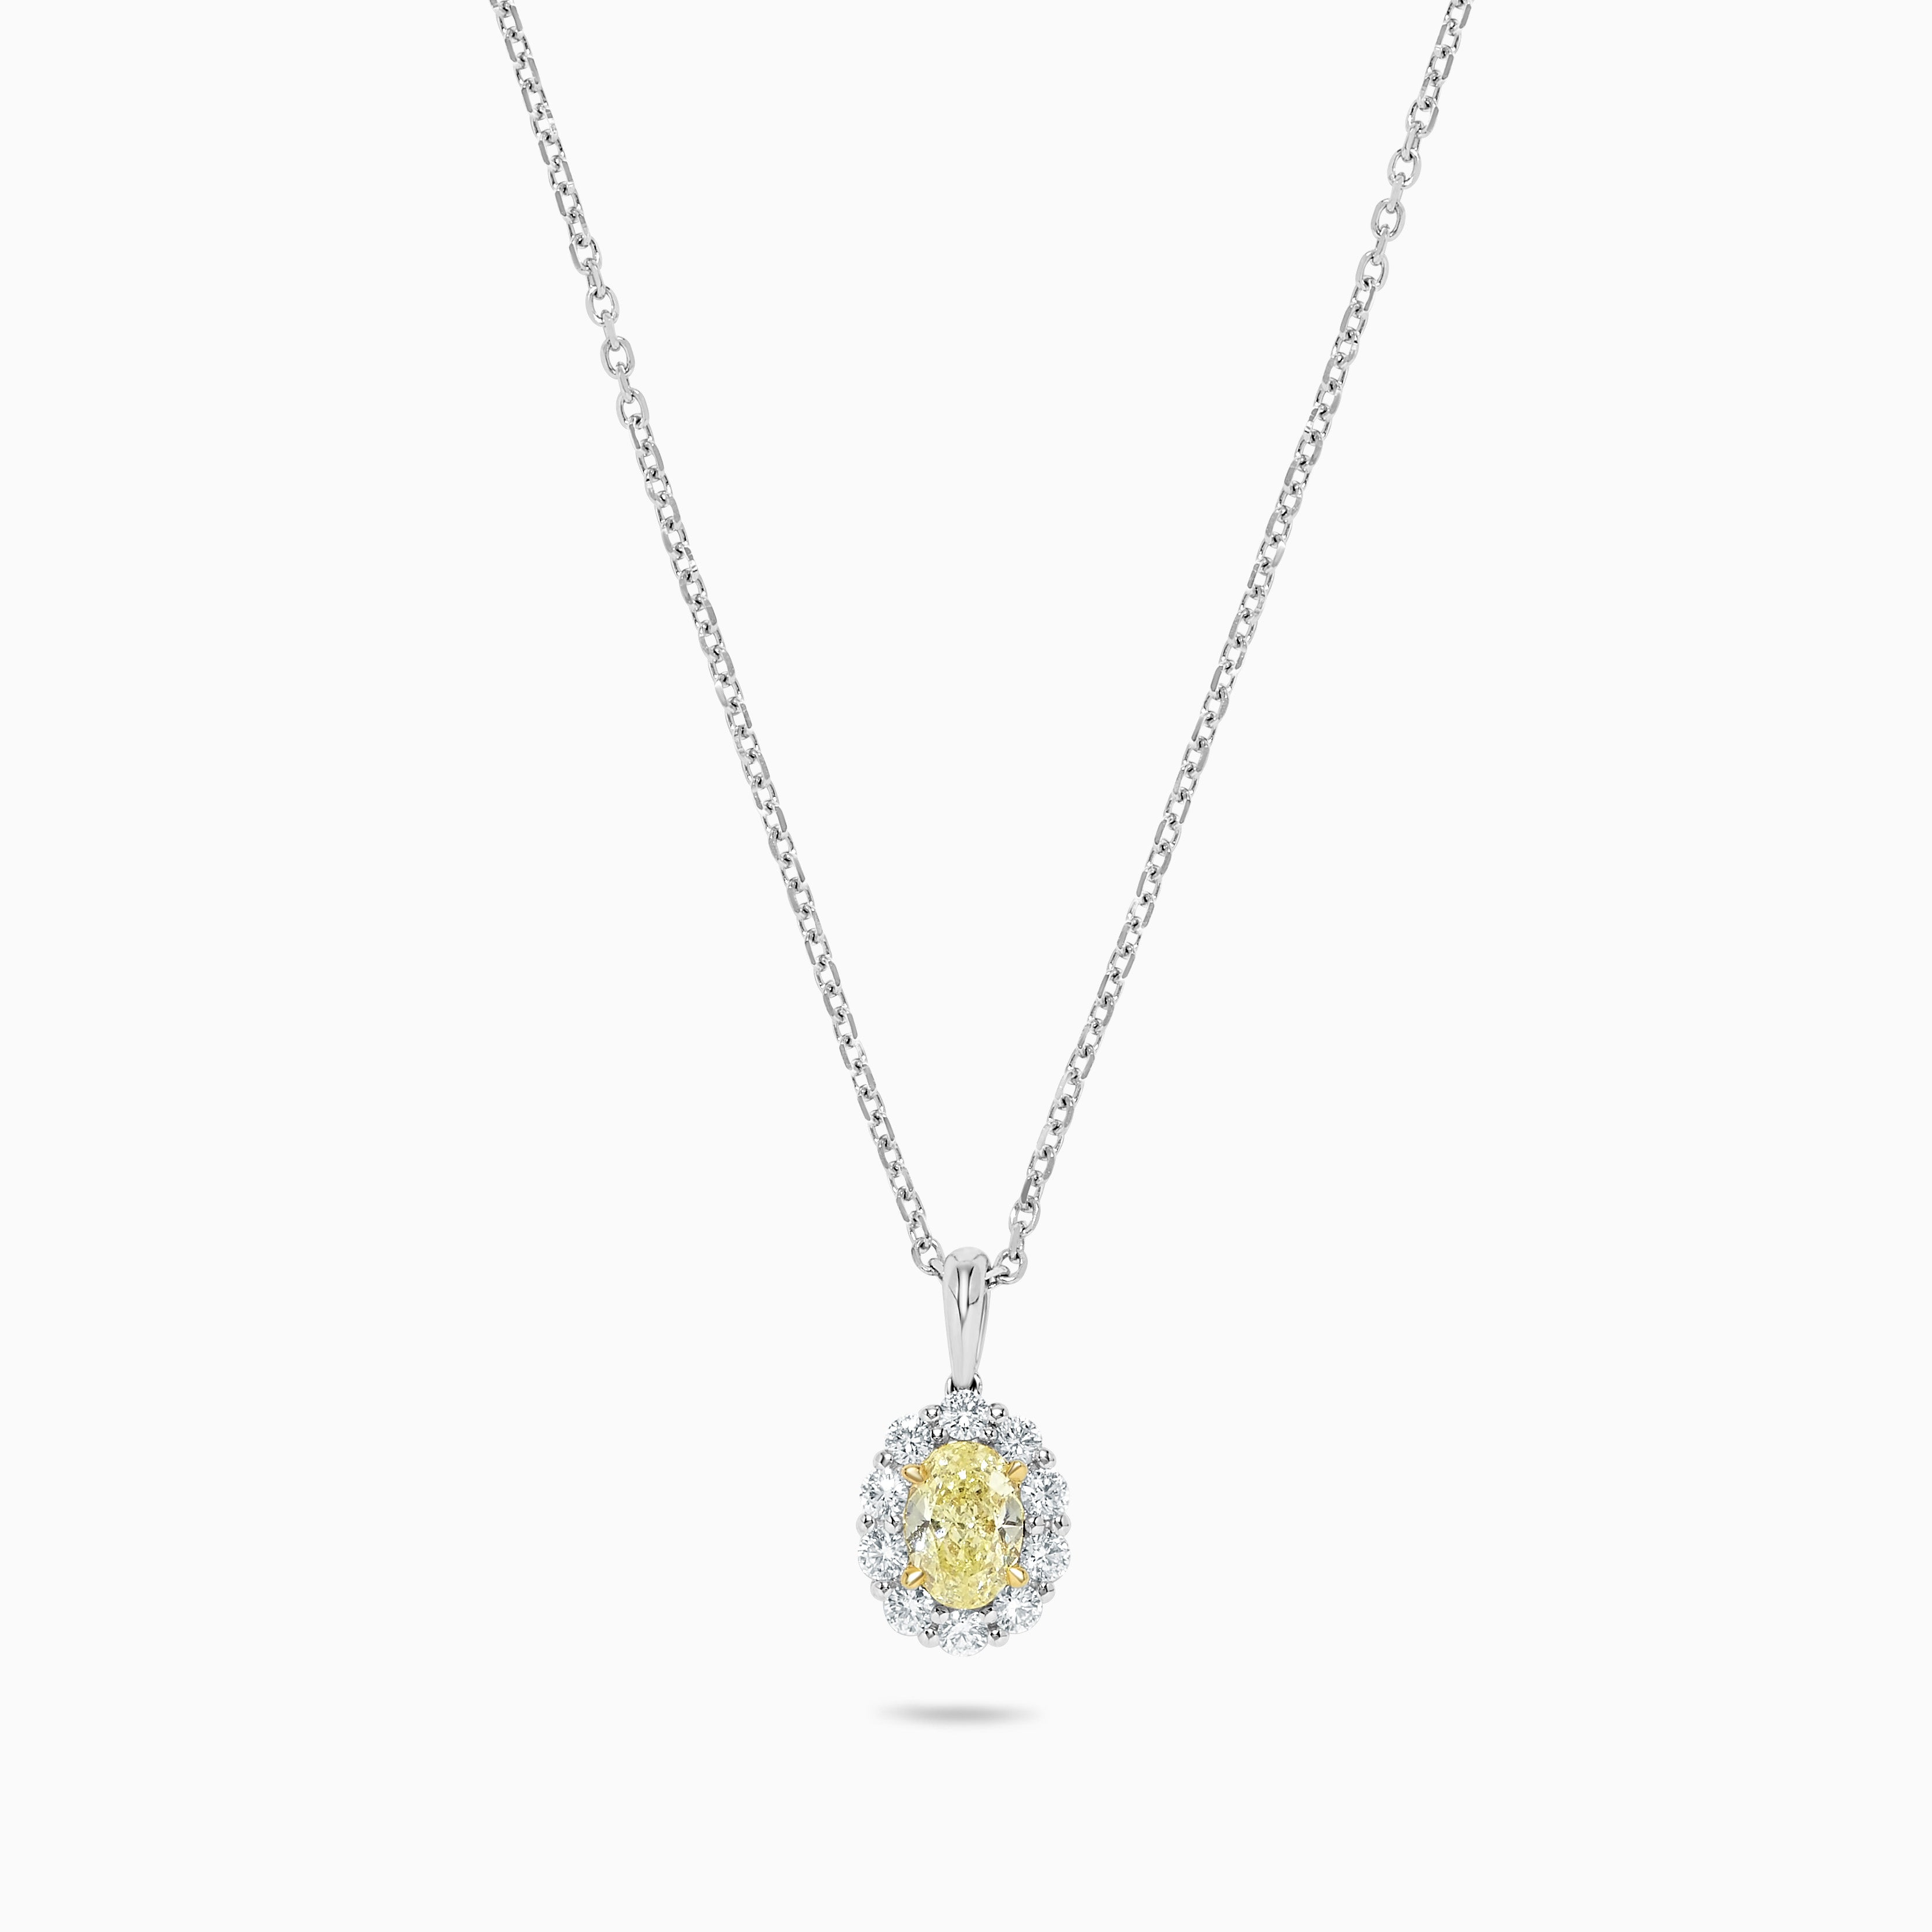 Natural Yellow Oval and White Diamond 1.04 Carat TW Gold Drop Pendant